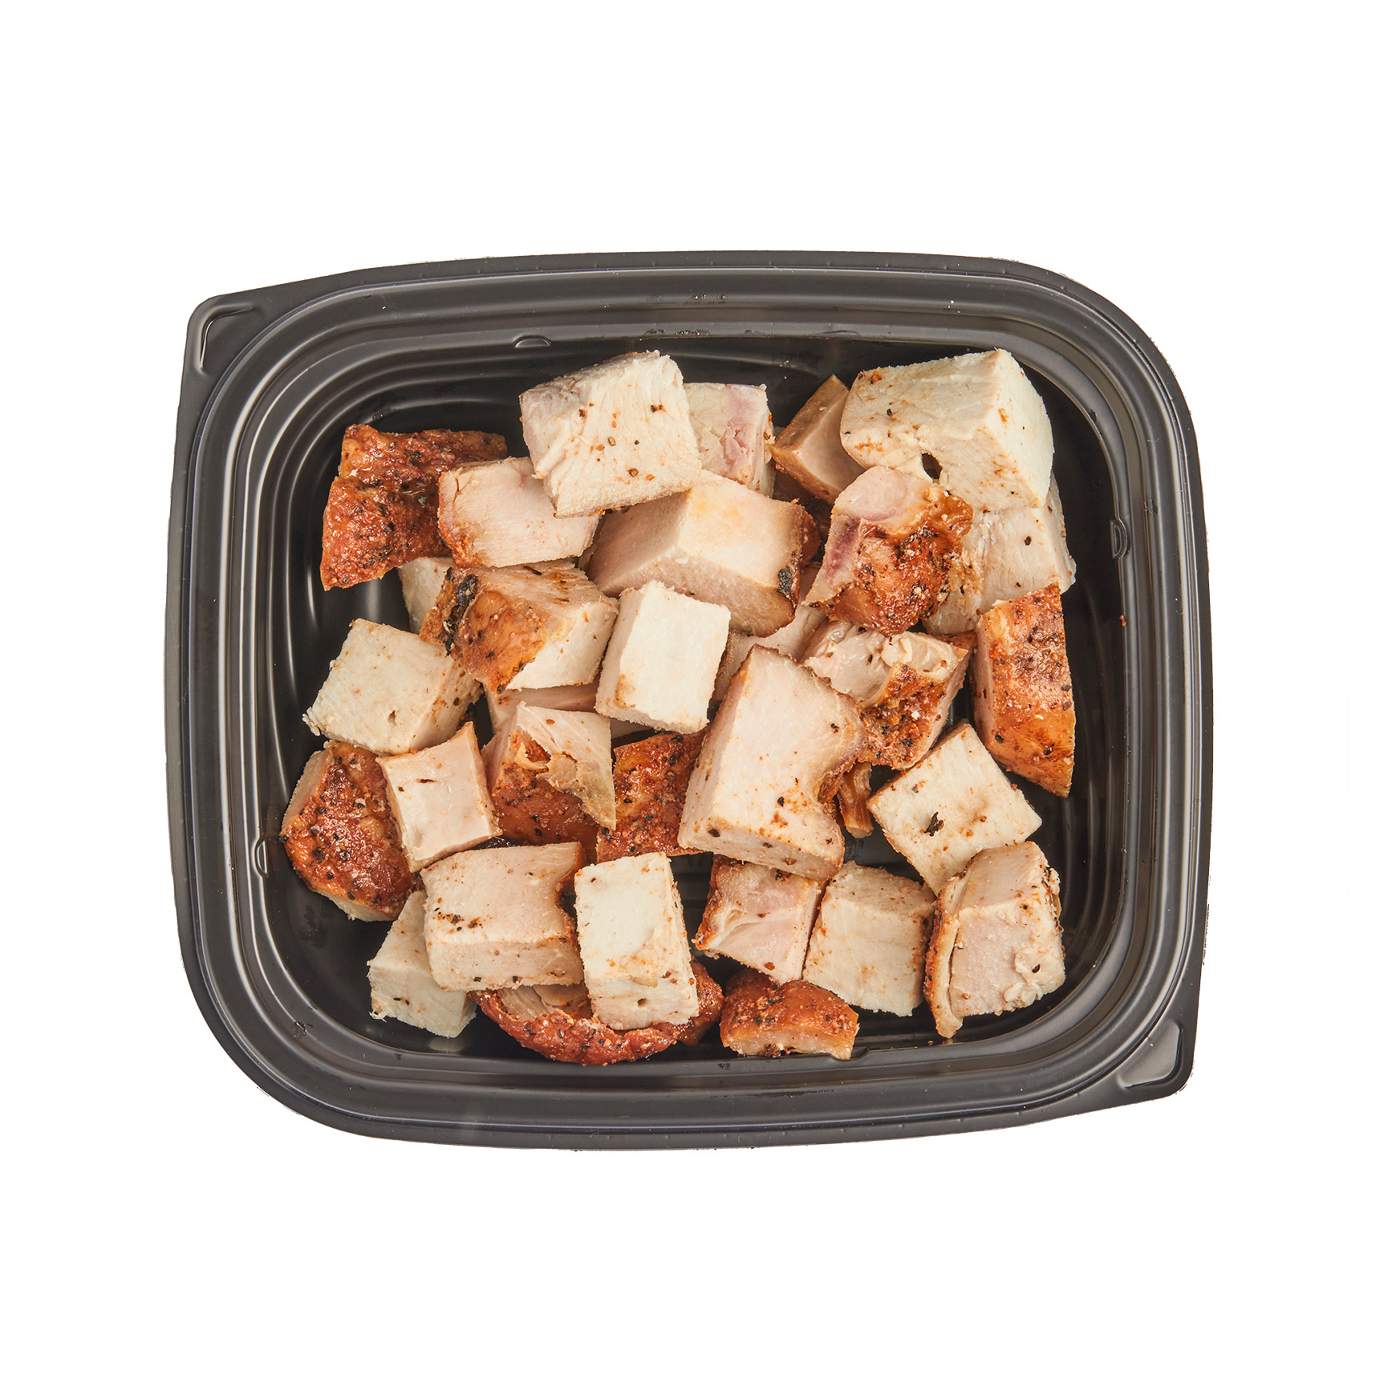 True Texas BBQ Cubed Smoked Turkey (Sold Cold); image 2 of 2